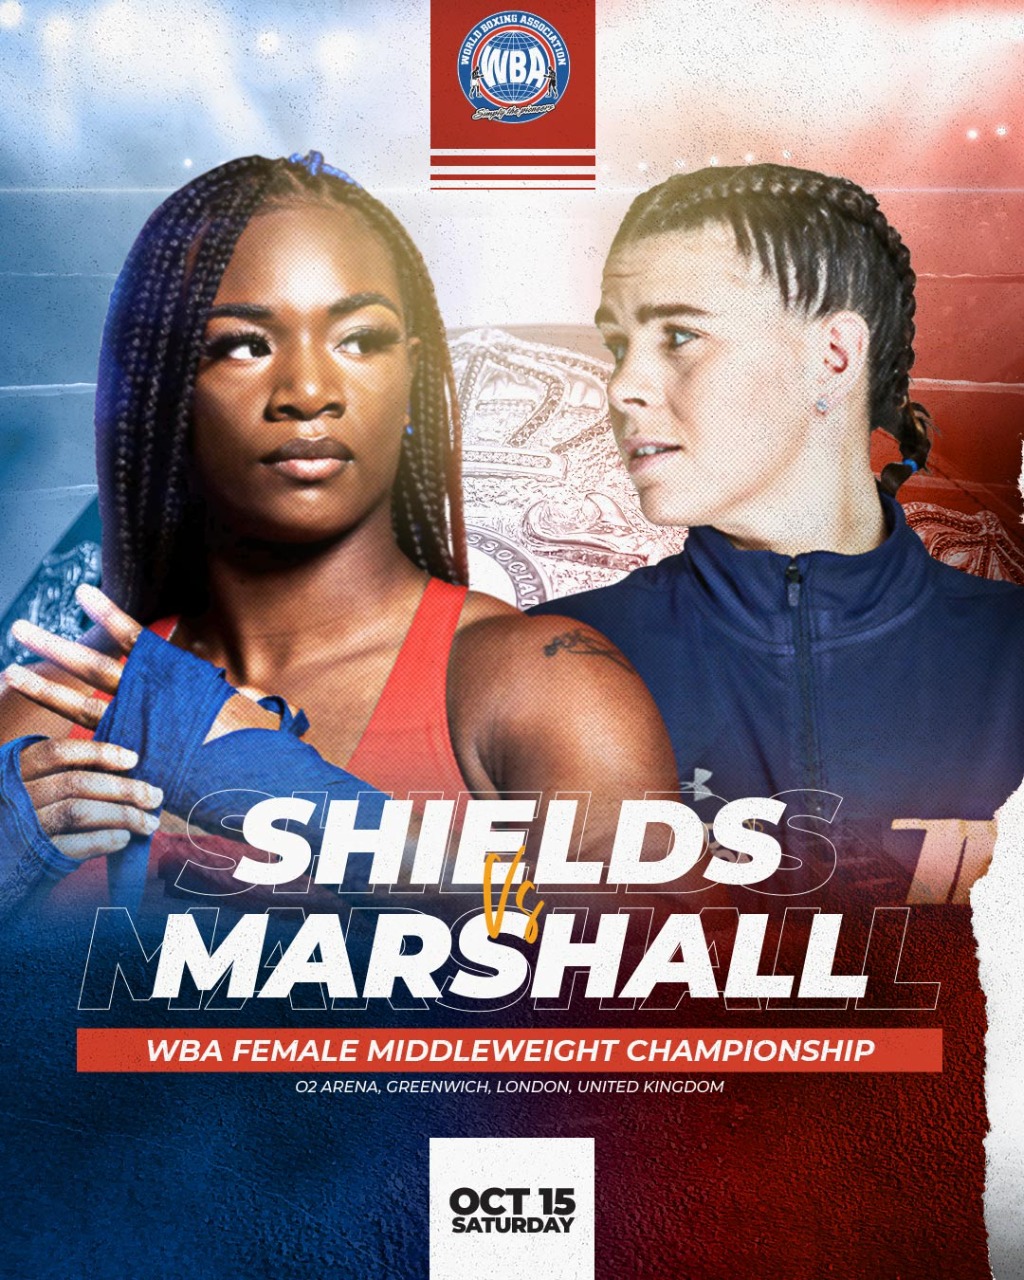 Shields-Marshall is another historic event… What could happen in the ring? 